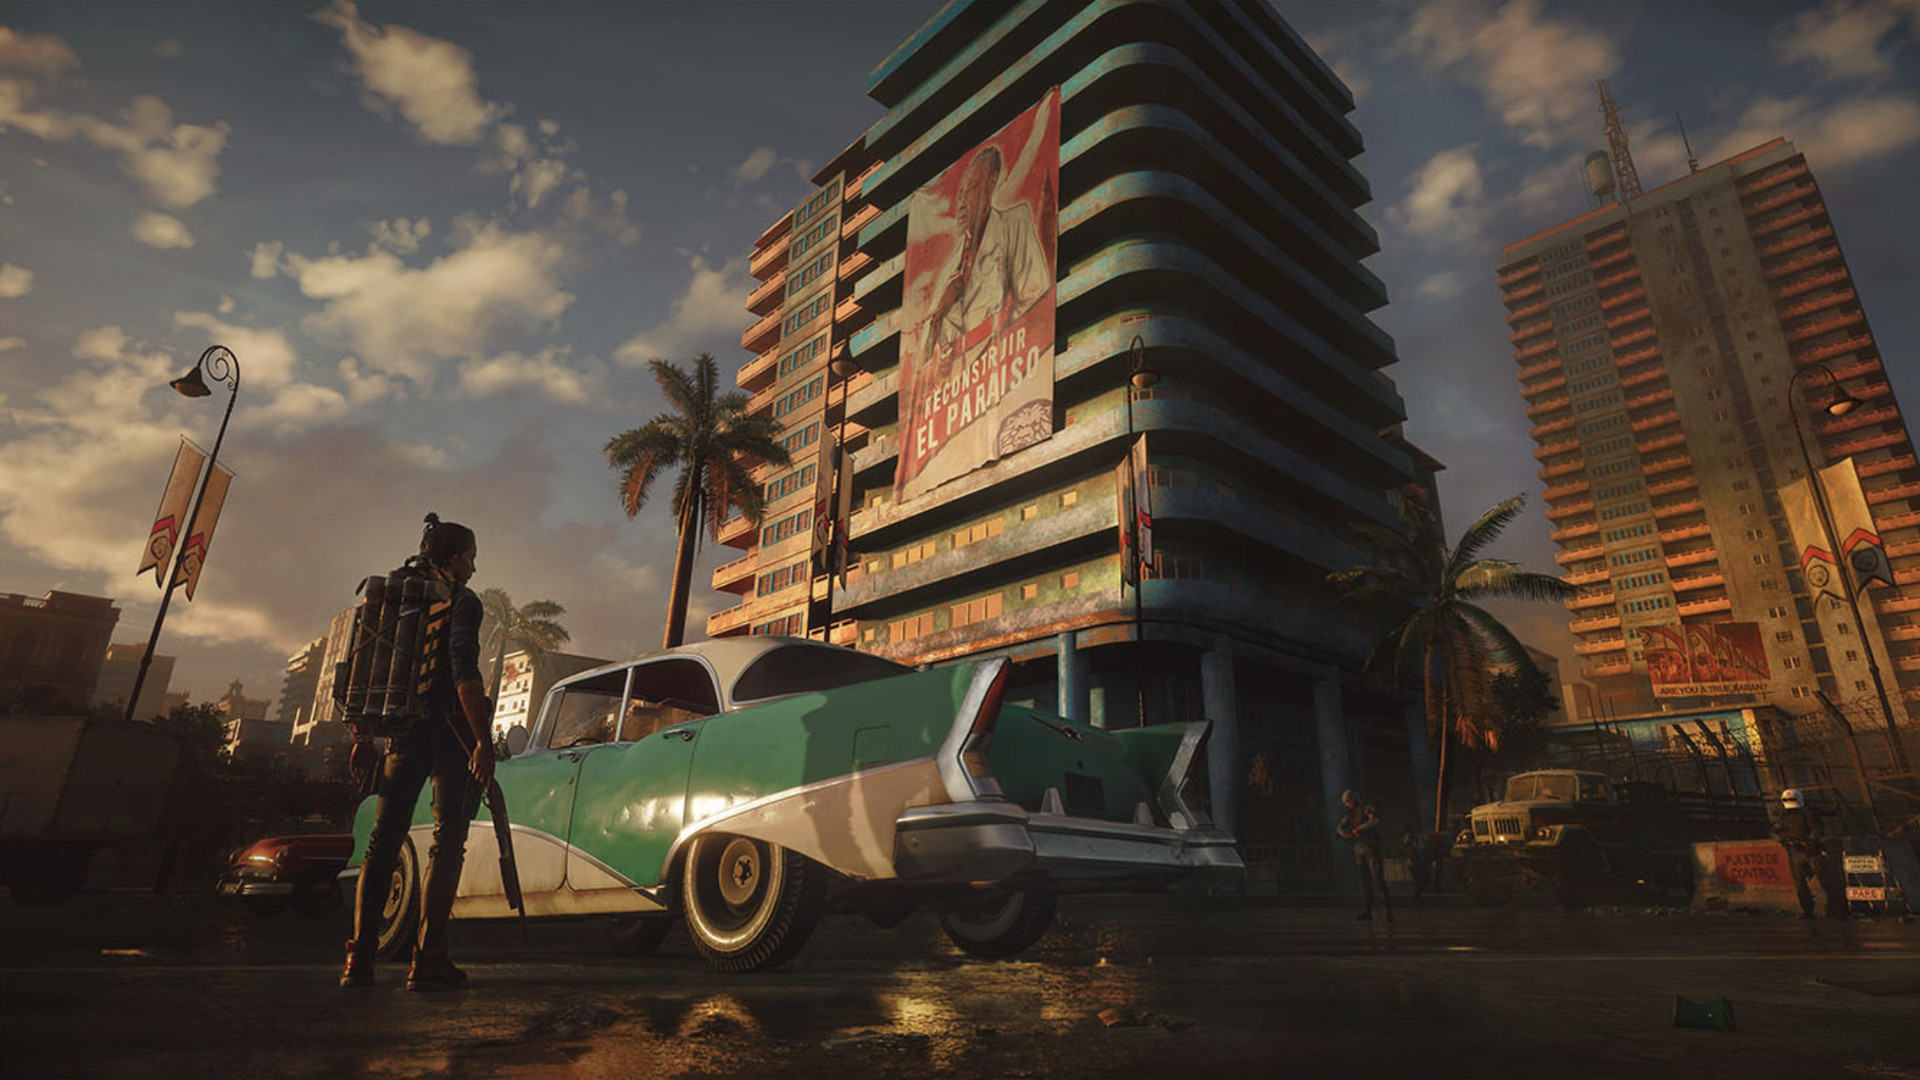 Graphic image of a scene from Far Cry 6, with a character standing in front of a vintage car and towering building